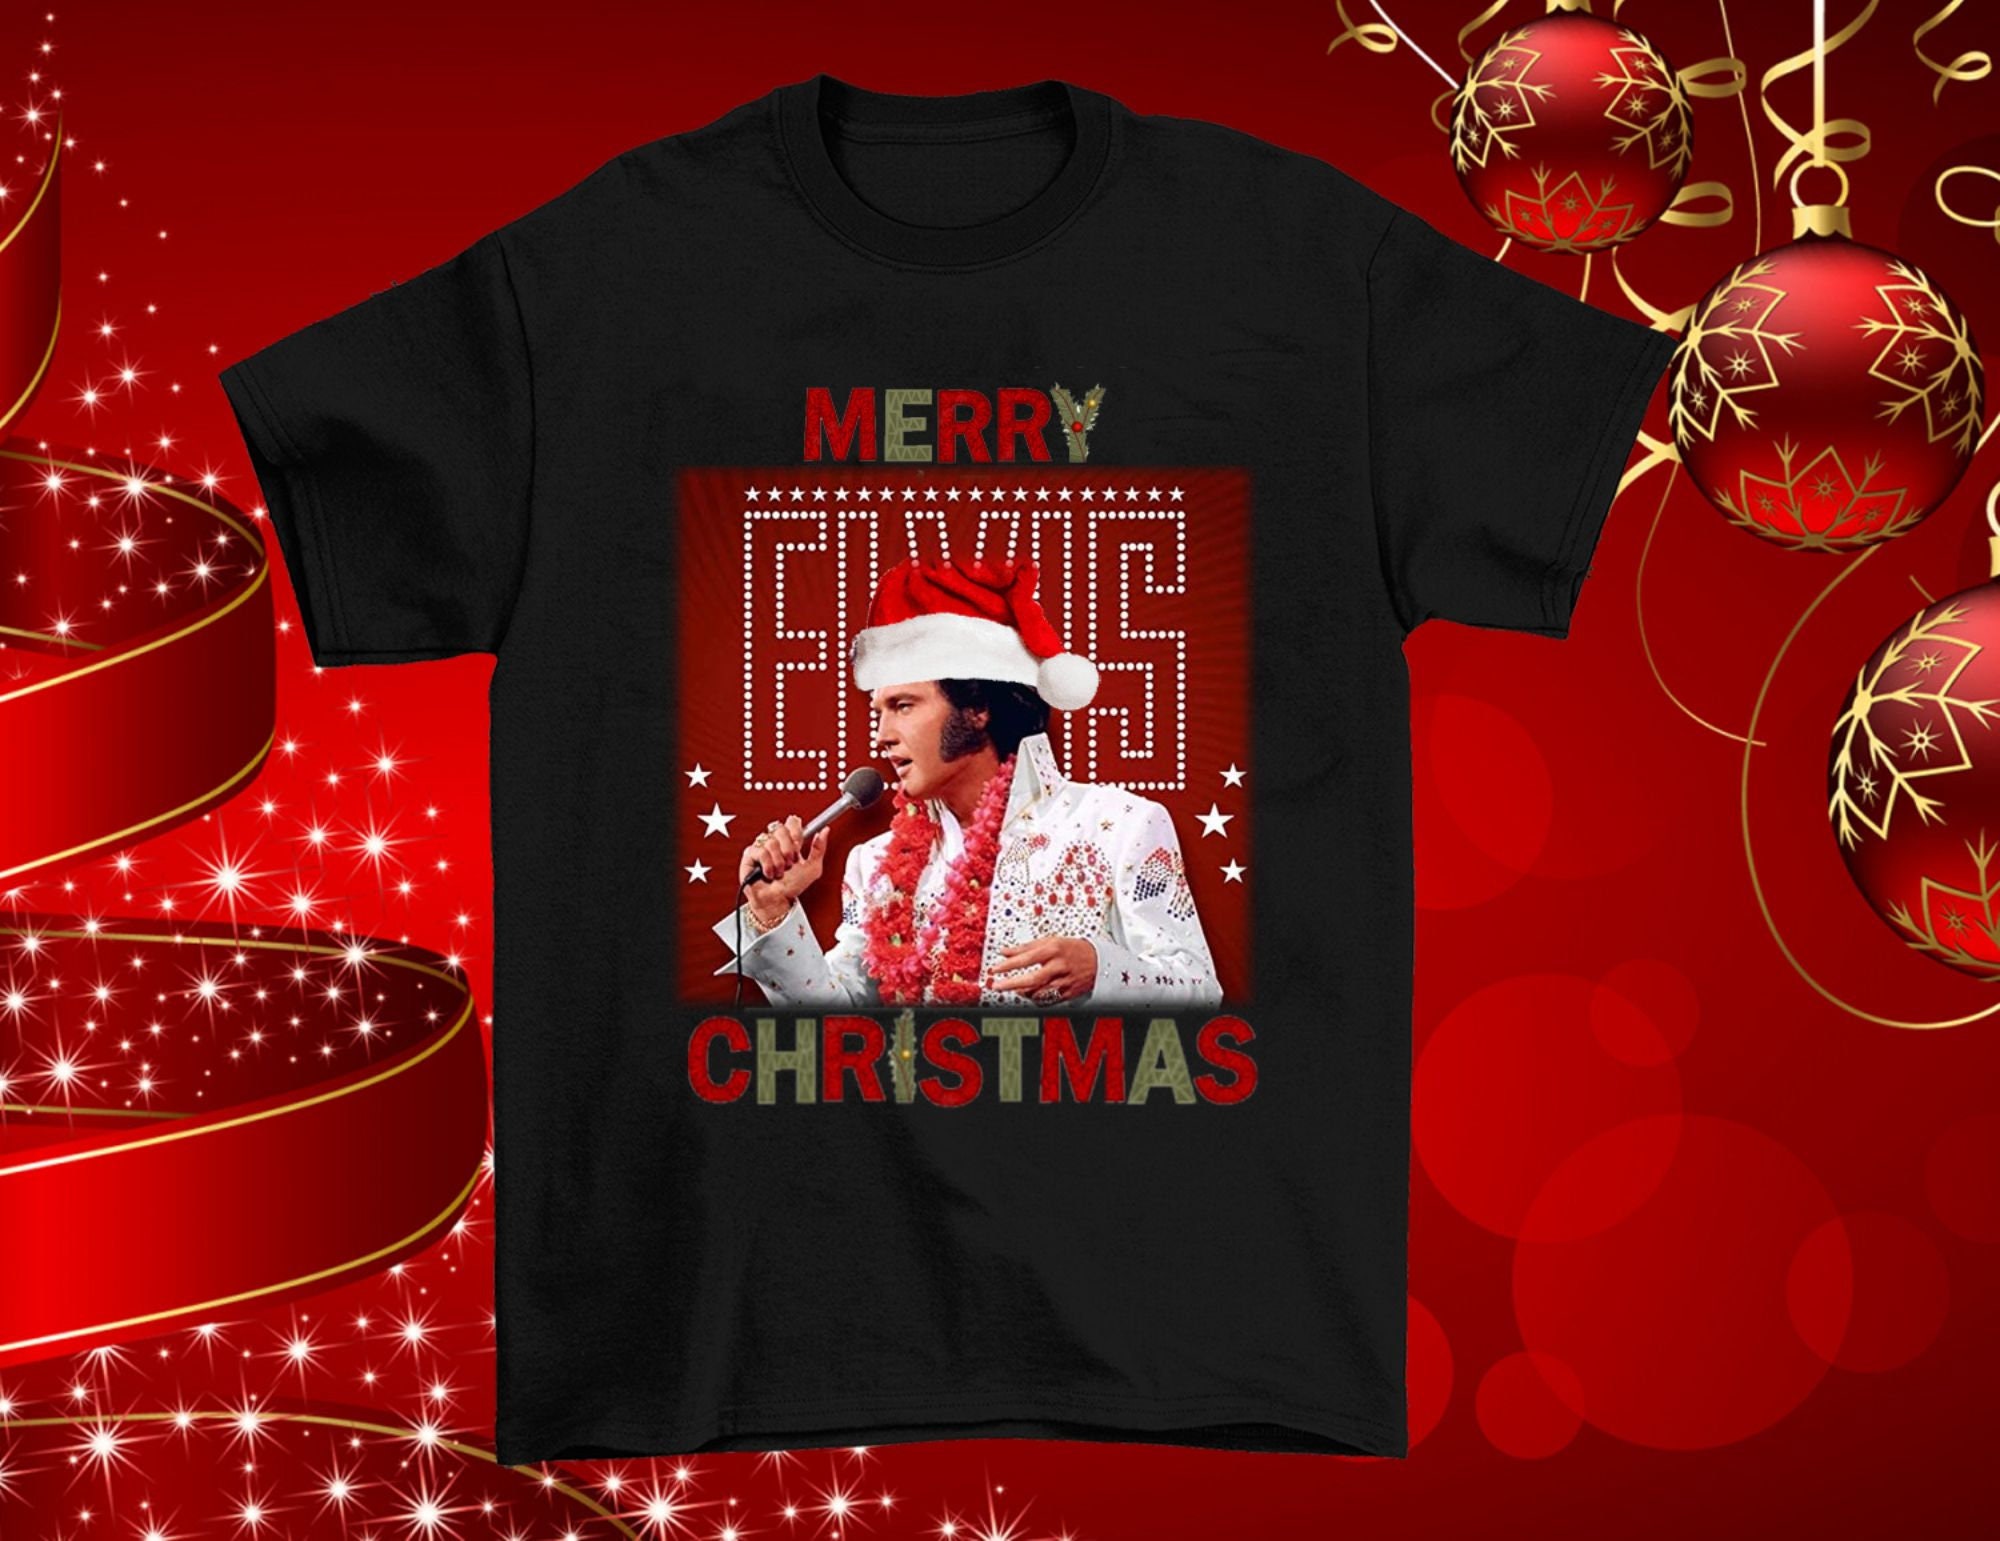 Discover Elvis Presley Xmas Gift for Elvis Fans Shirt, The King Rock & Roll Gift